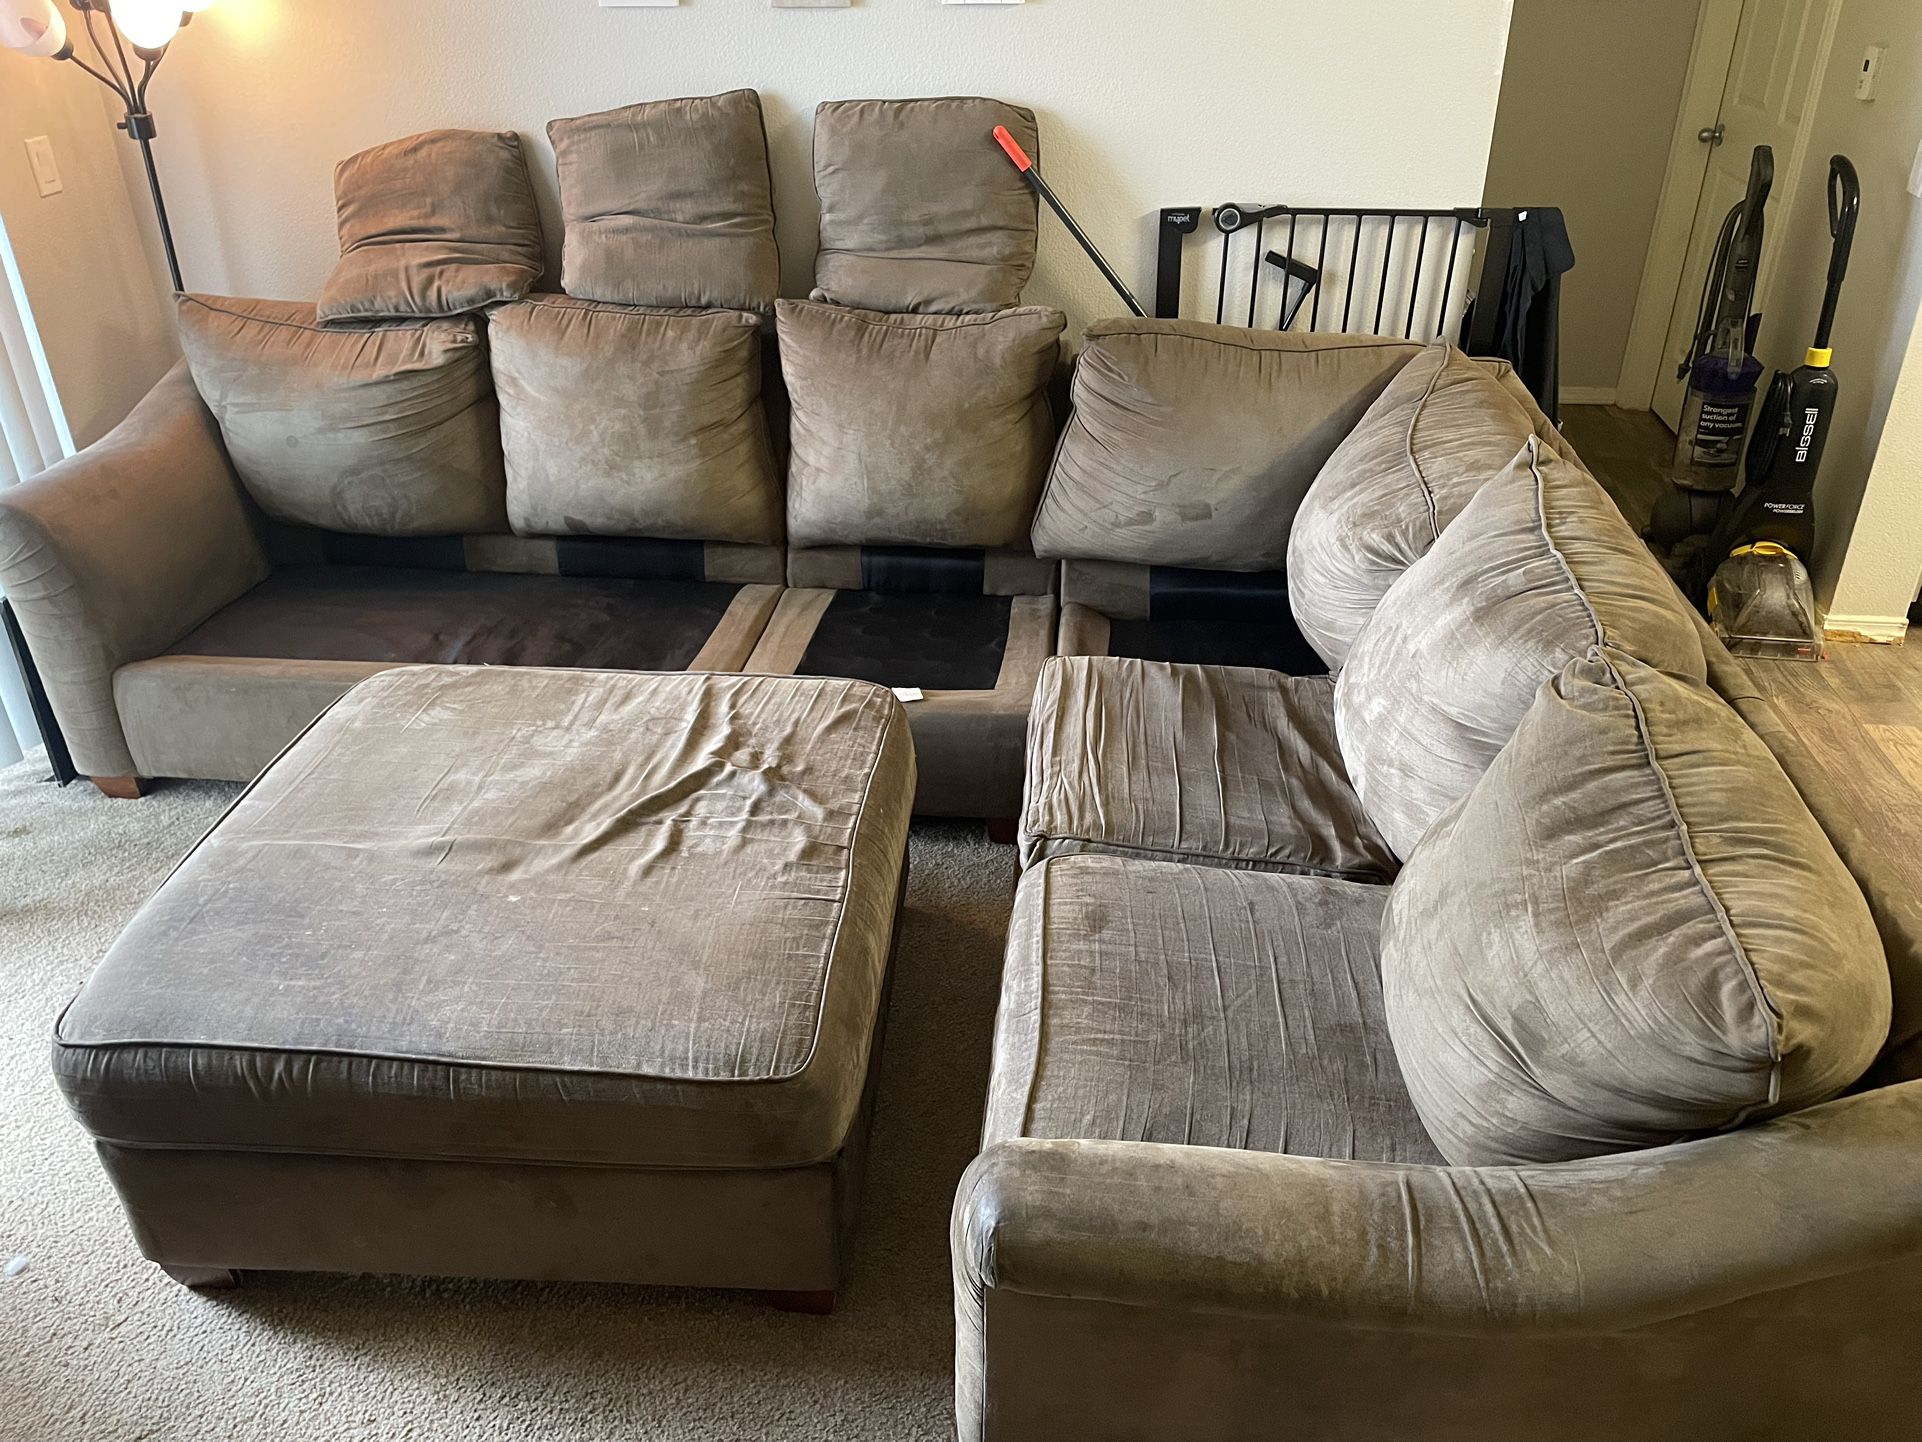 3 Piece Sectional Couch With Storage Ottoman And 3 Pillows